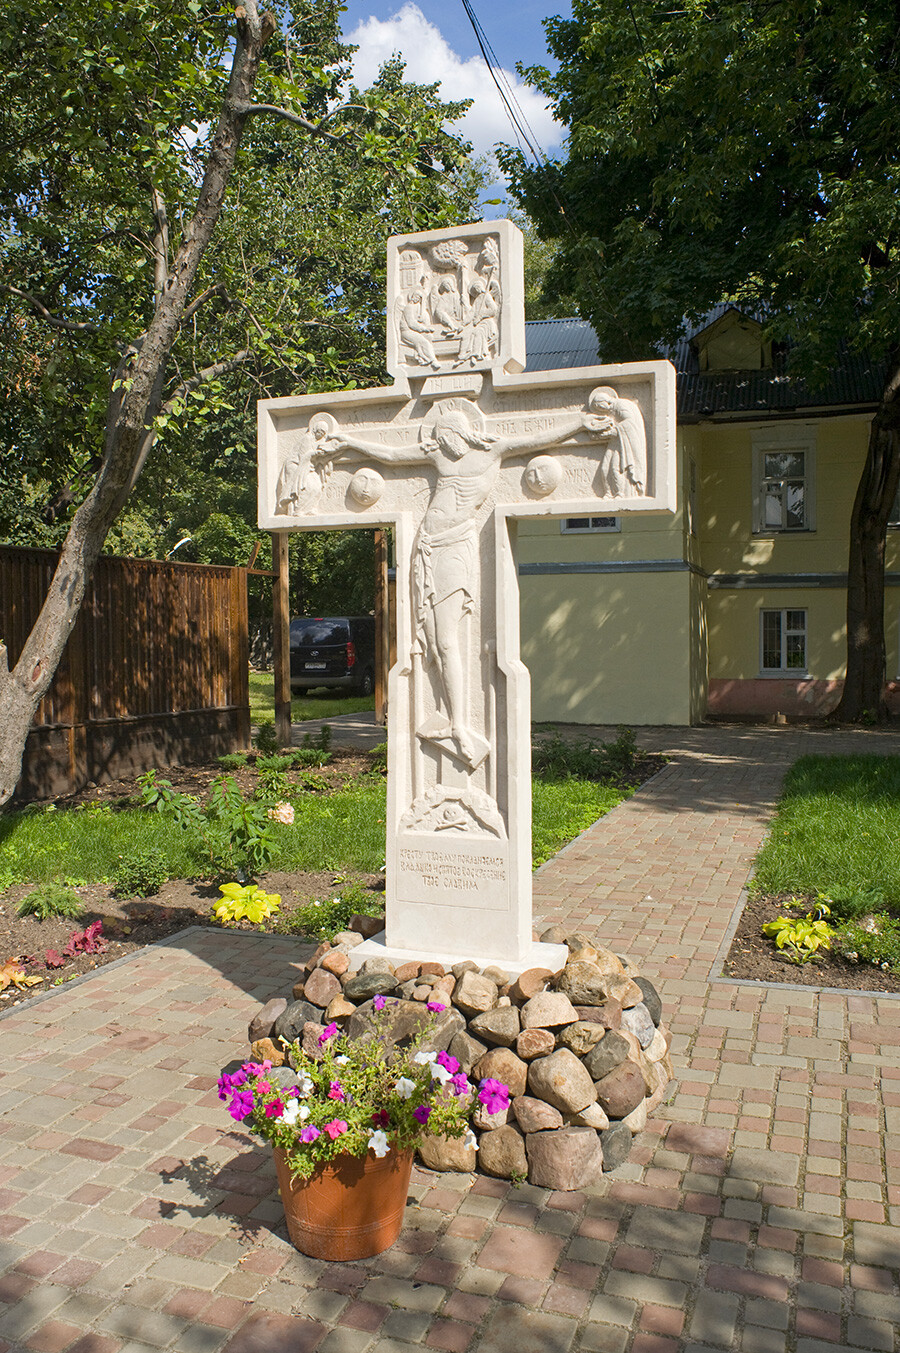 Moscow, Krutitsy. Votive cross placed in 2012 on First Krutitsky Lane to commemorate the gathering of Russian forces in 1612 during the battle for the Kremlin. August 18, 2013